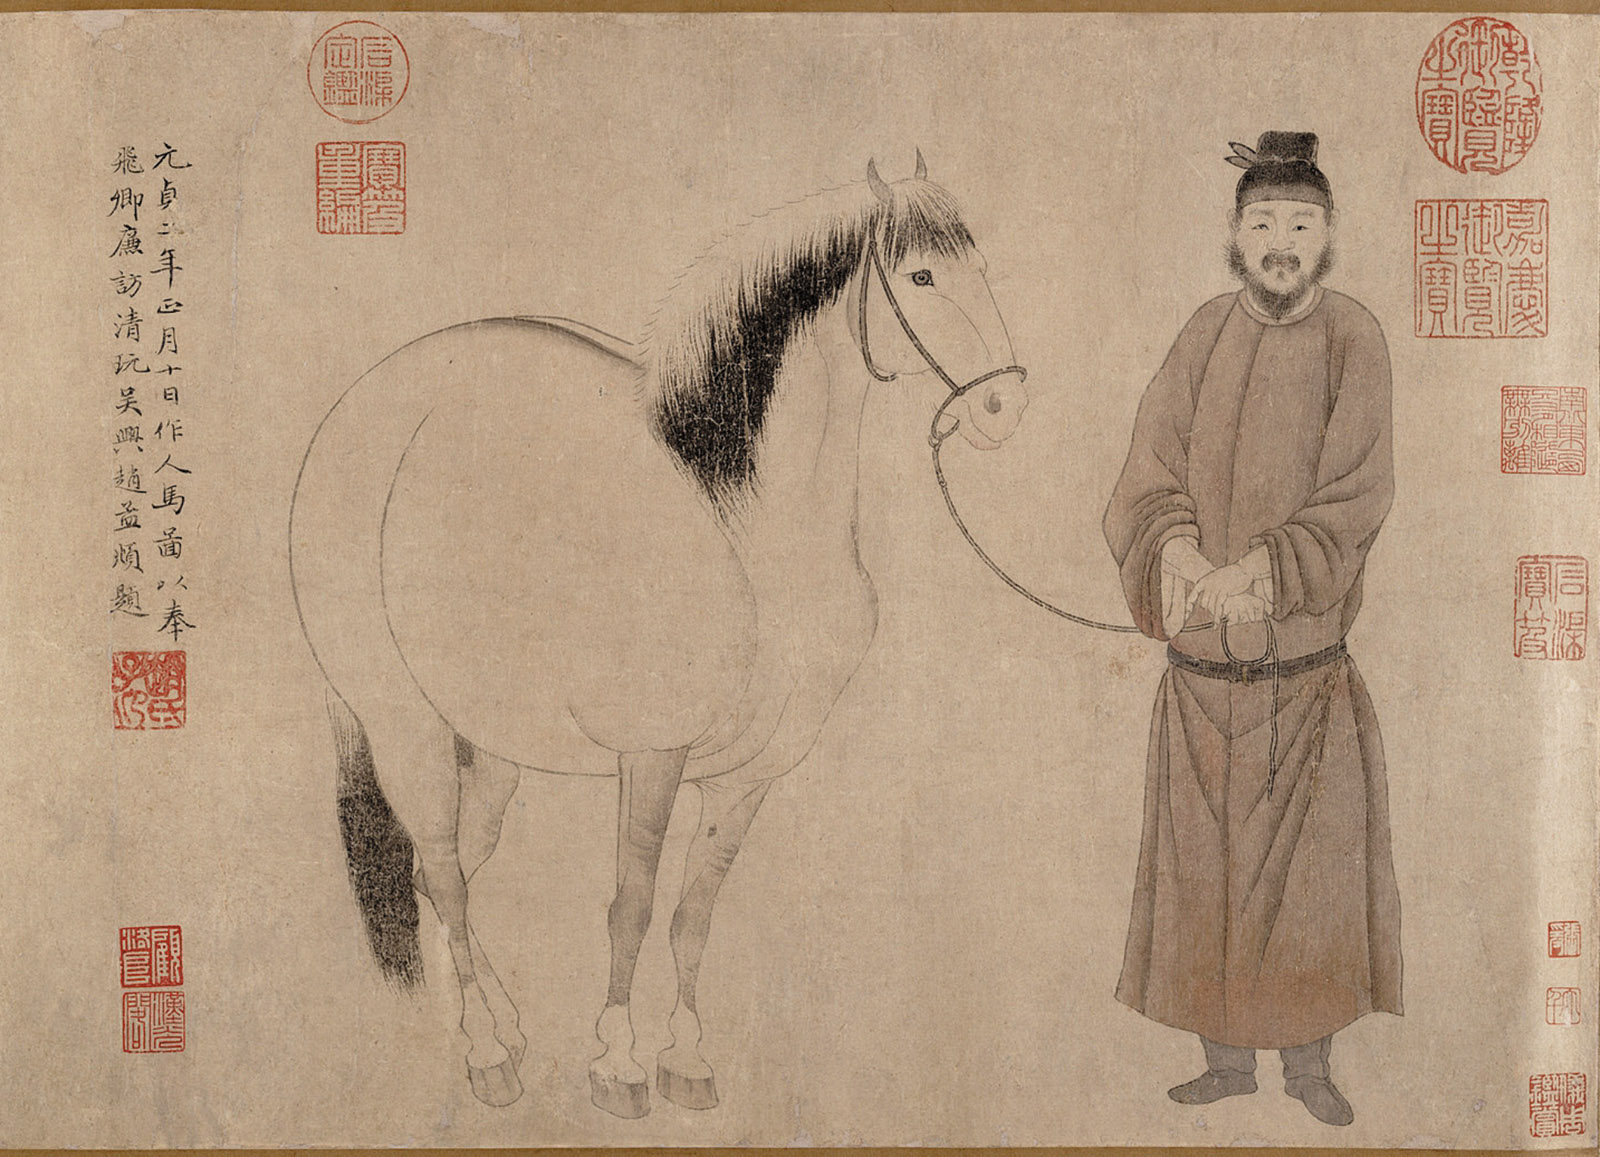 ‘Man and Horse’; handscroll by Zhao Mengfu, Yuan dynasty, 1296